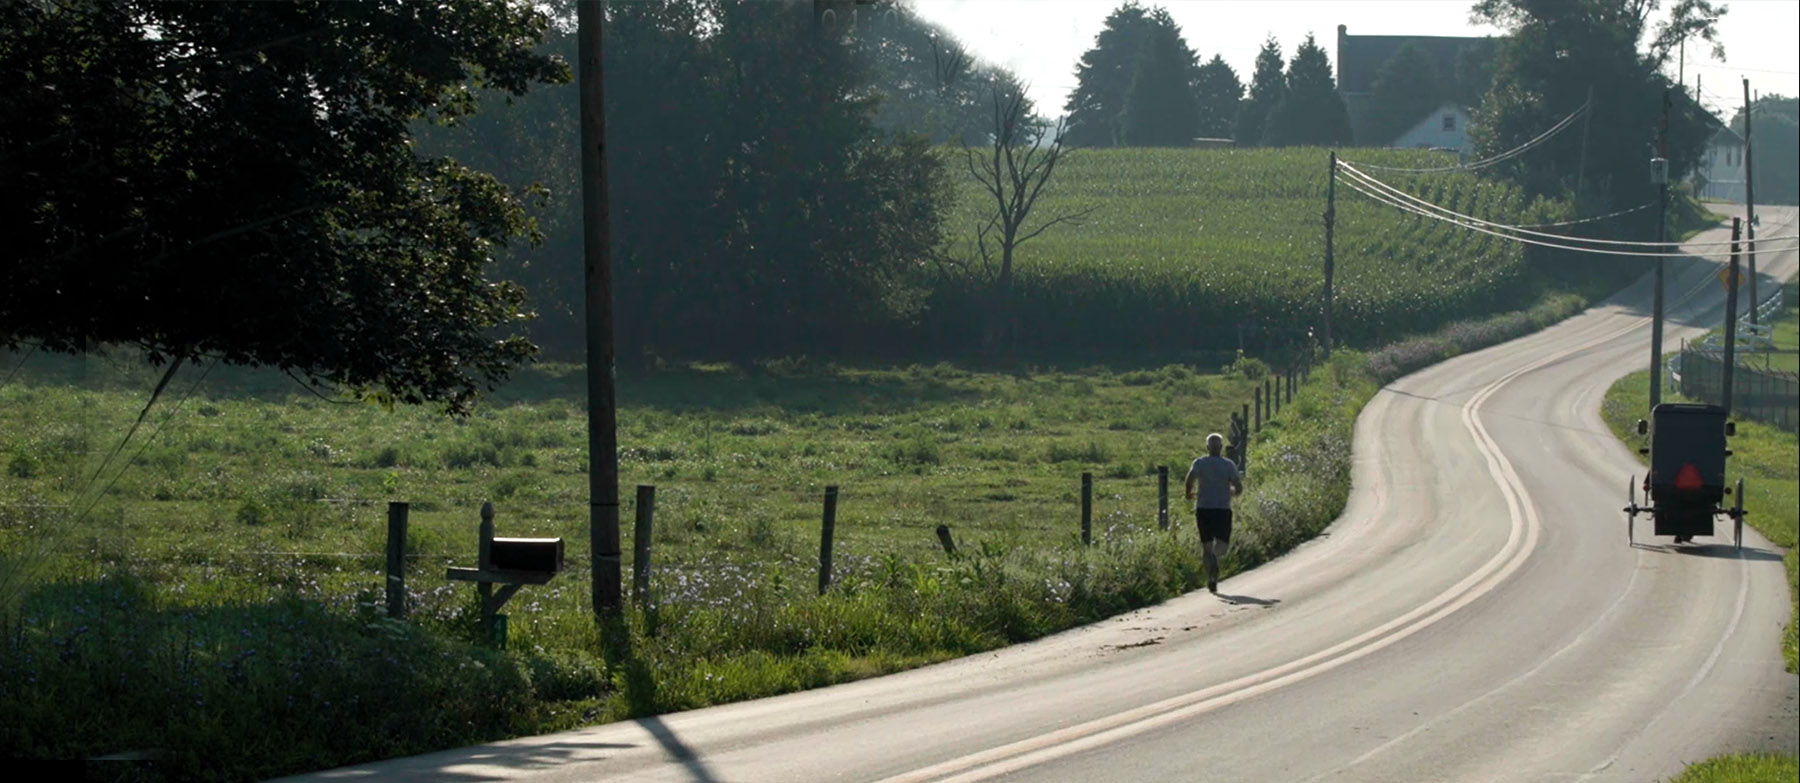 Jonathan on a morning run past the former Amish school site.